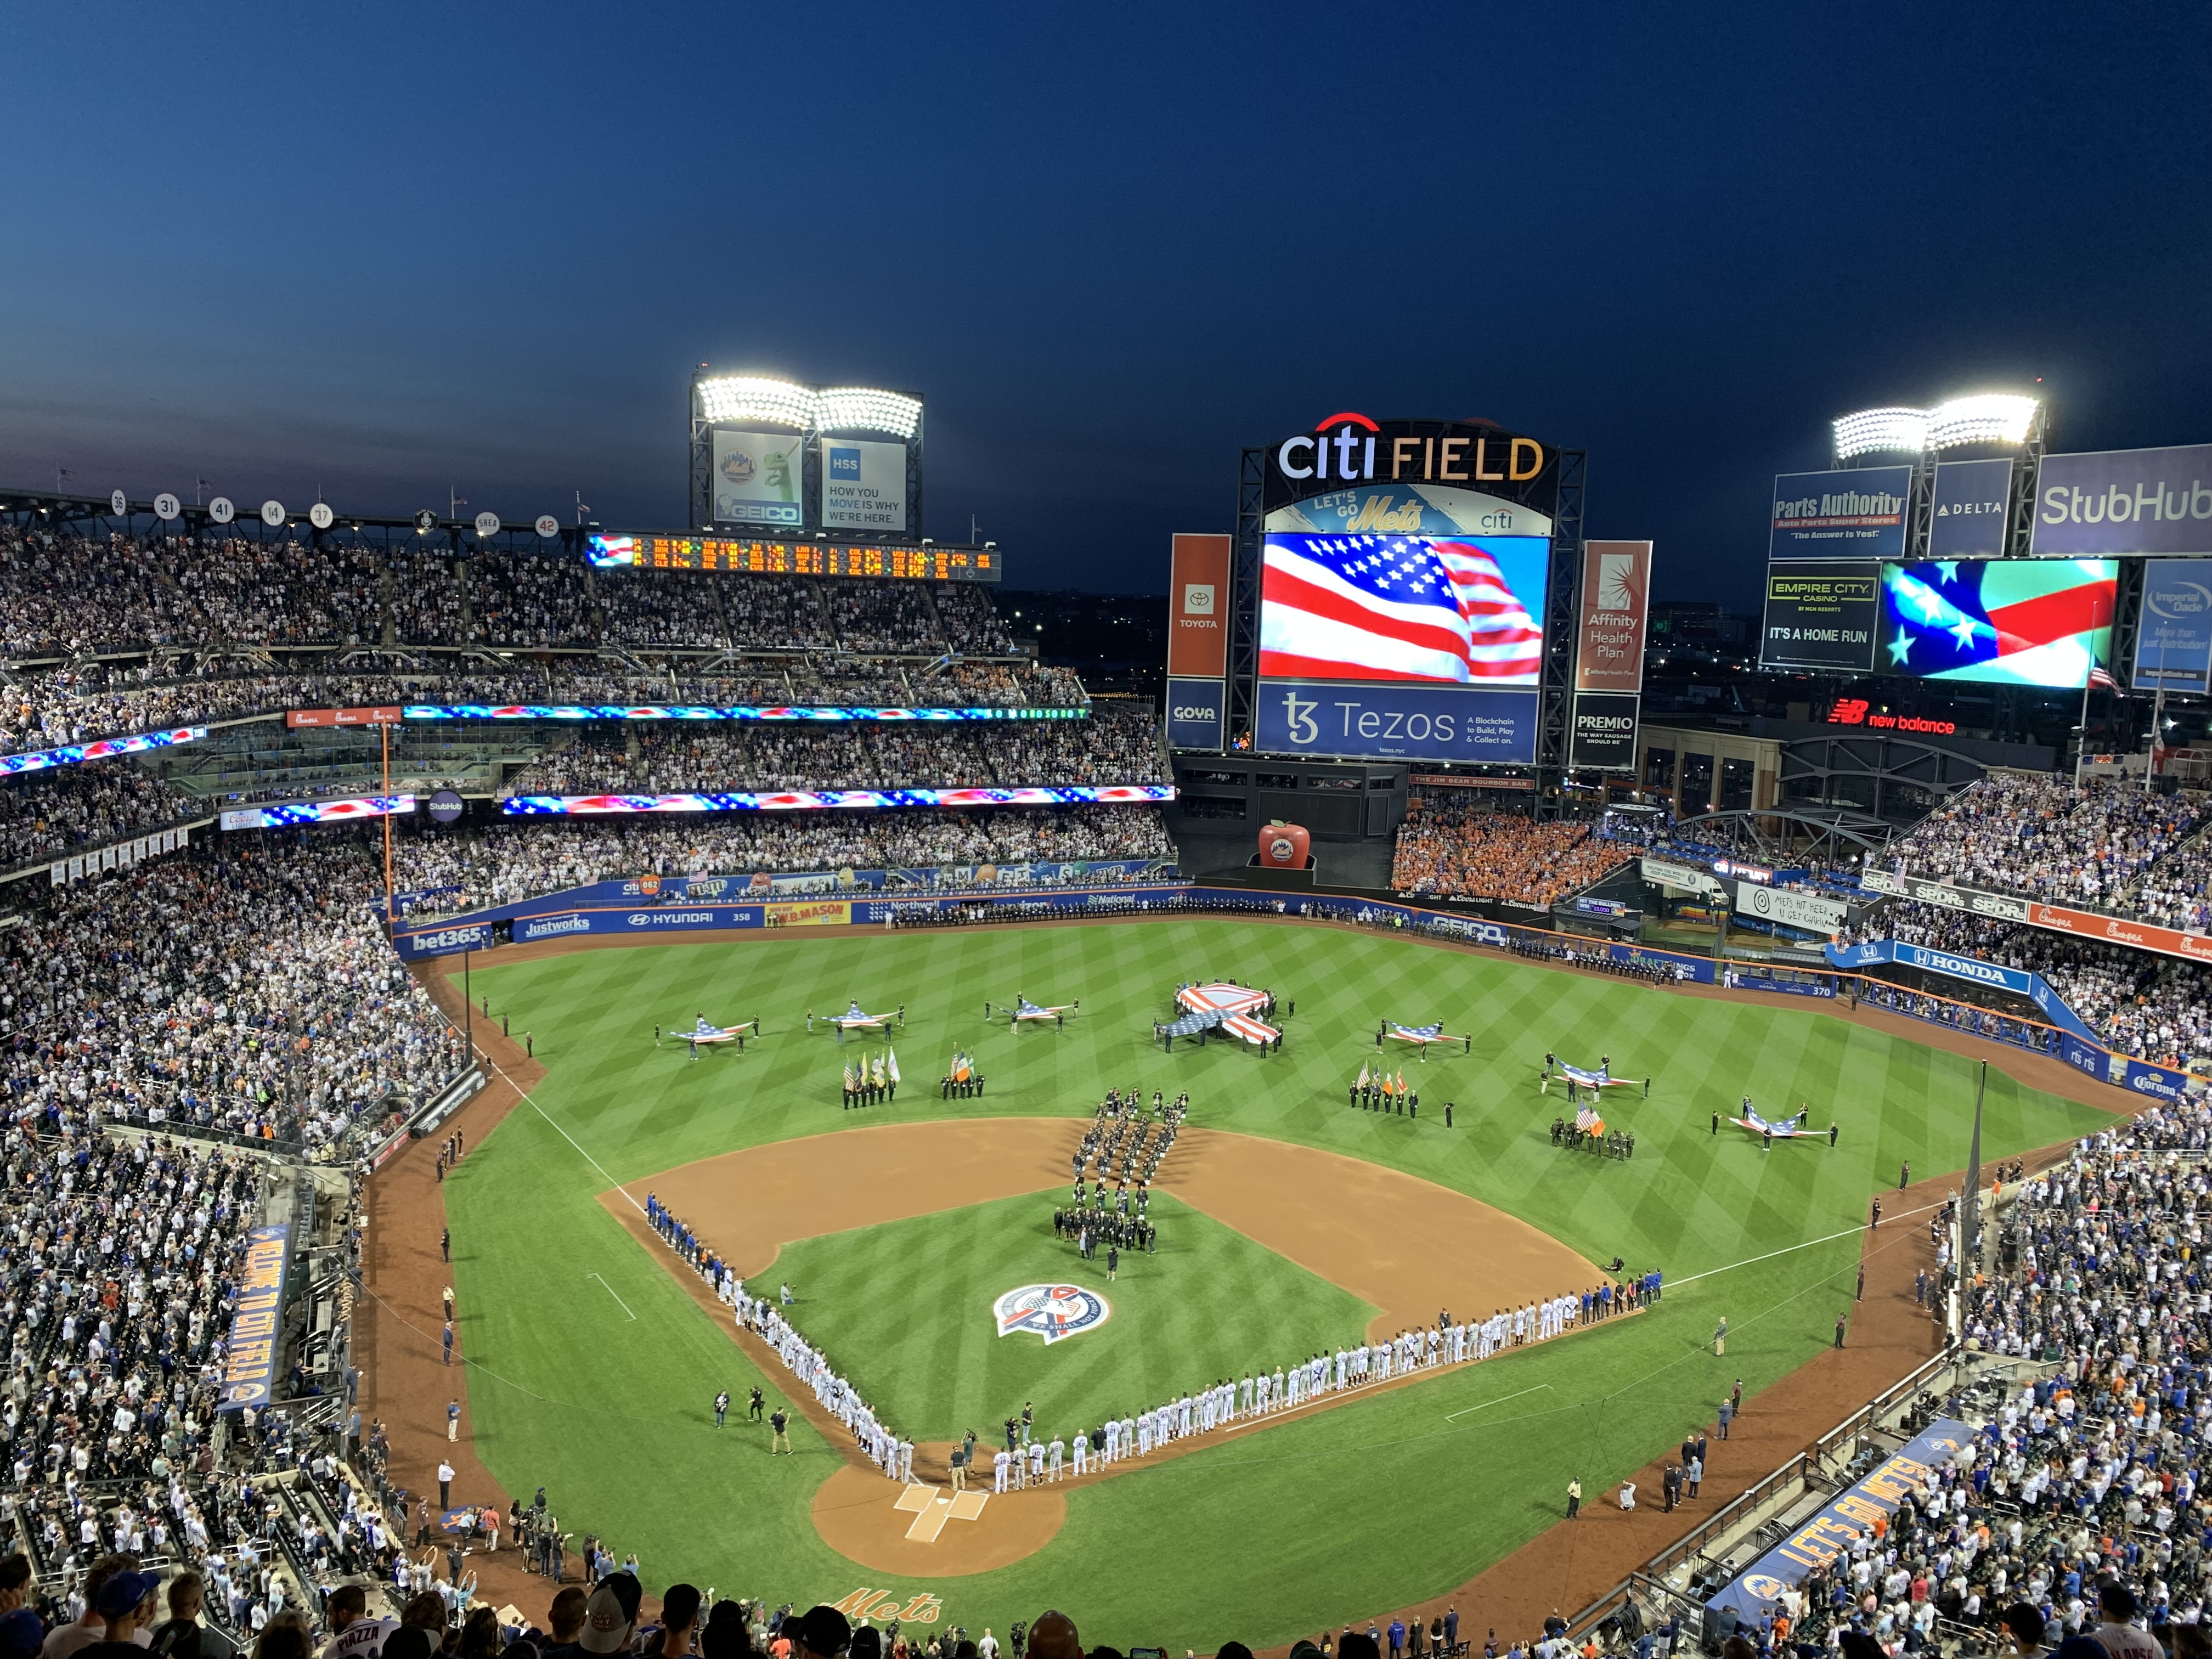 NY Yankees, Mets unite on 20th anniversary of 9/11